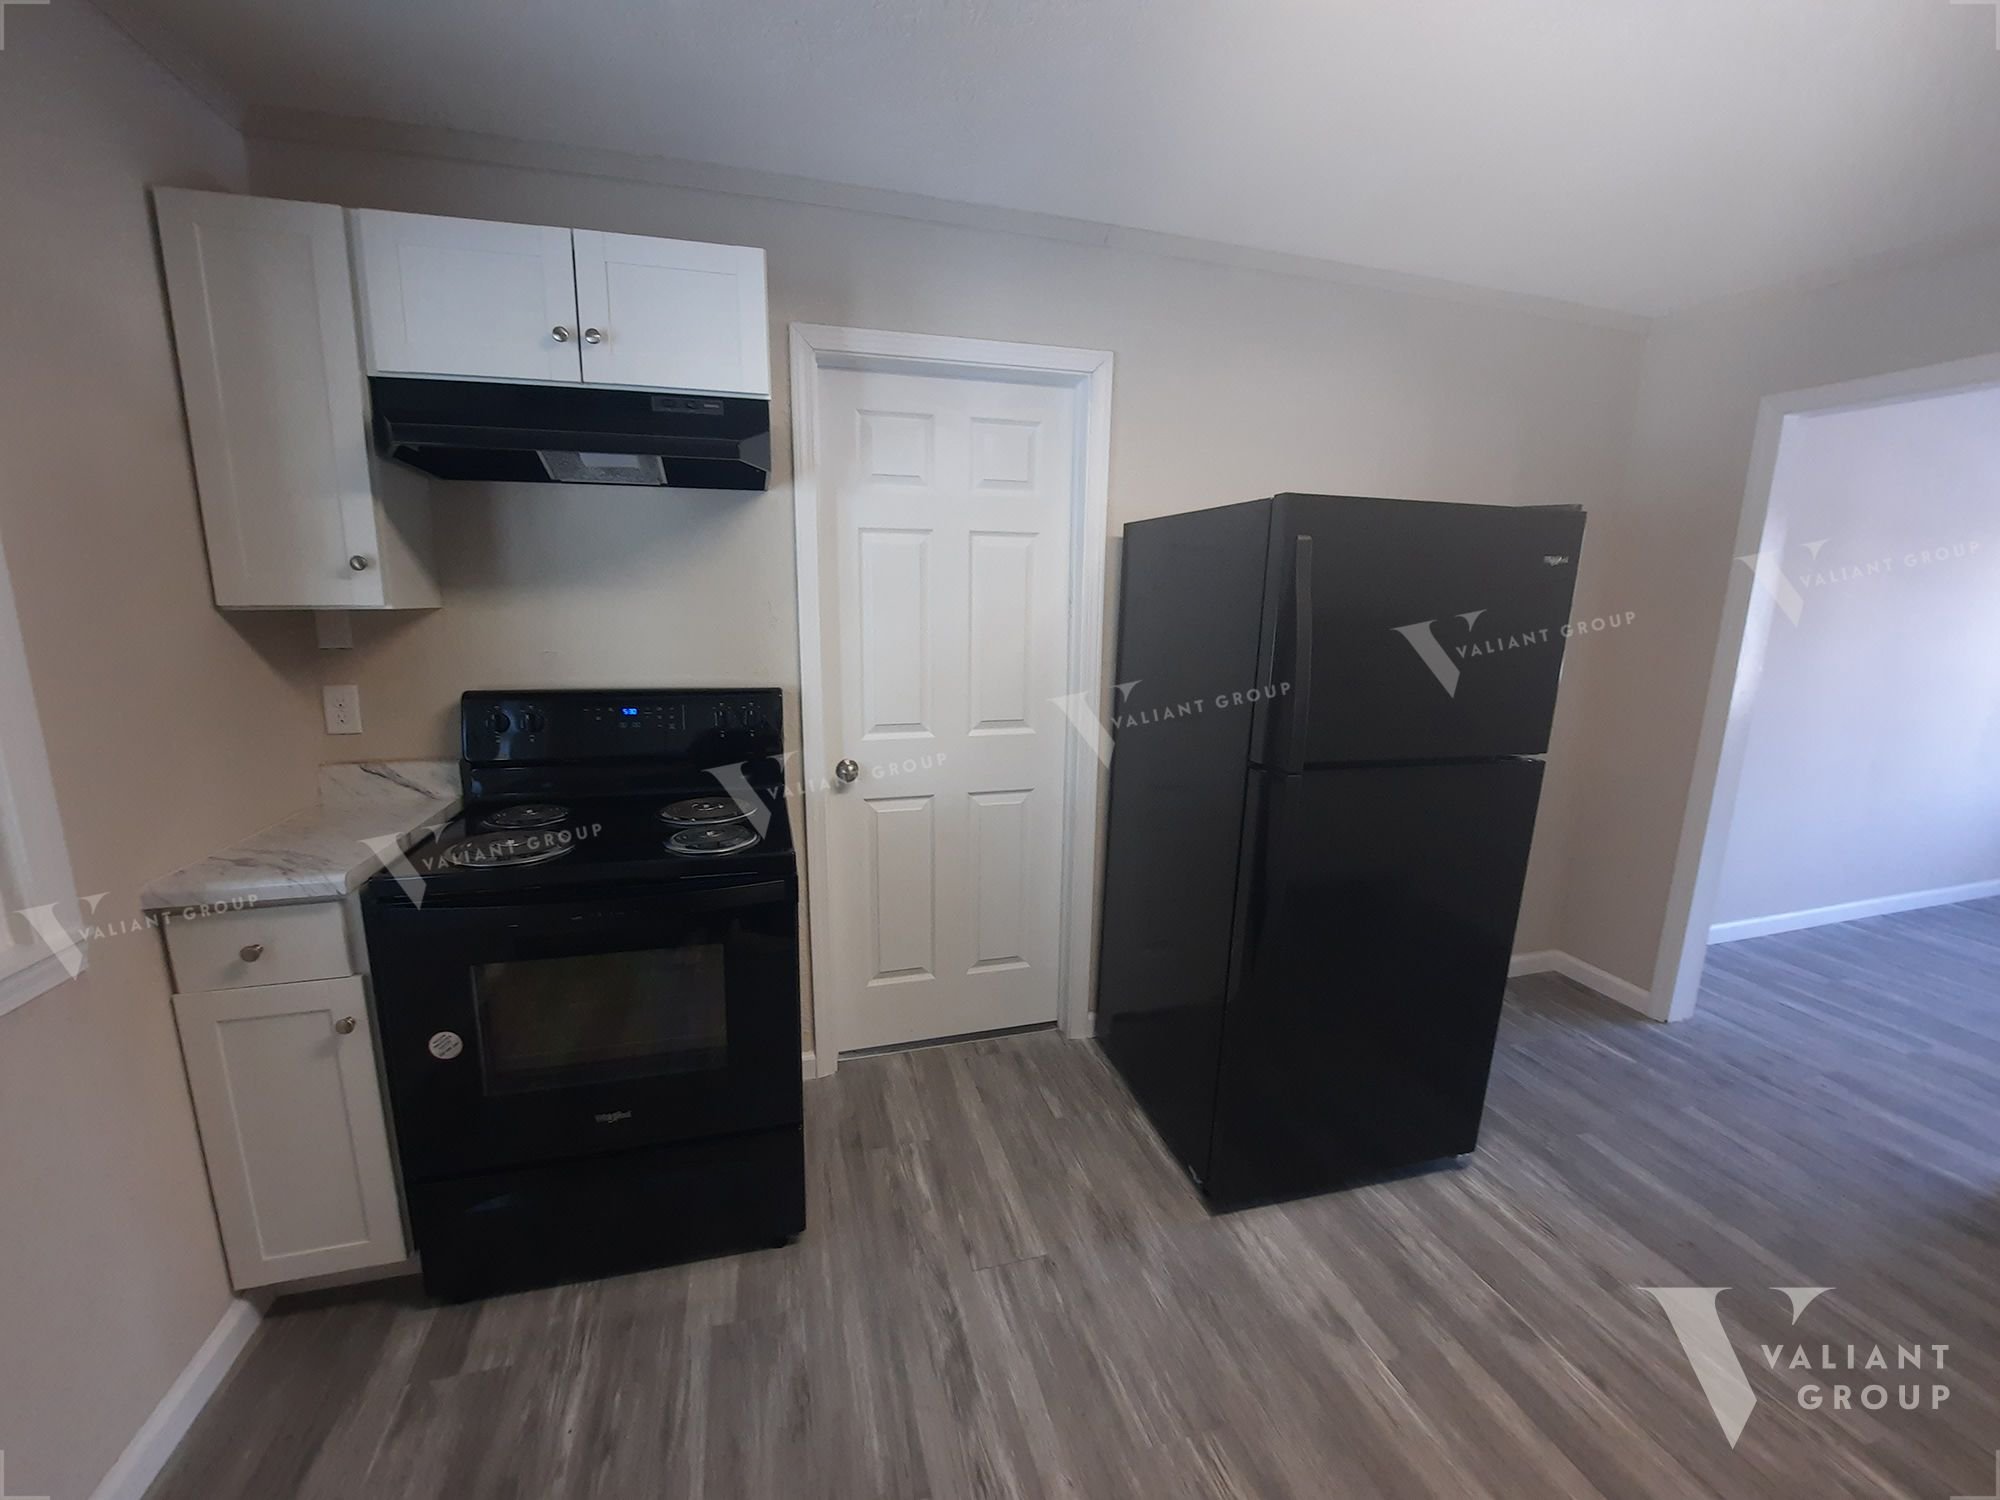 House-For-Rent-1326-N-Prospect-Ave-Springfield- MO-07-Kitchen-Stove.jpg